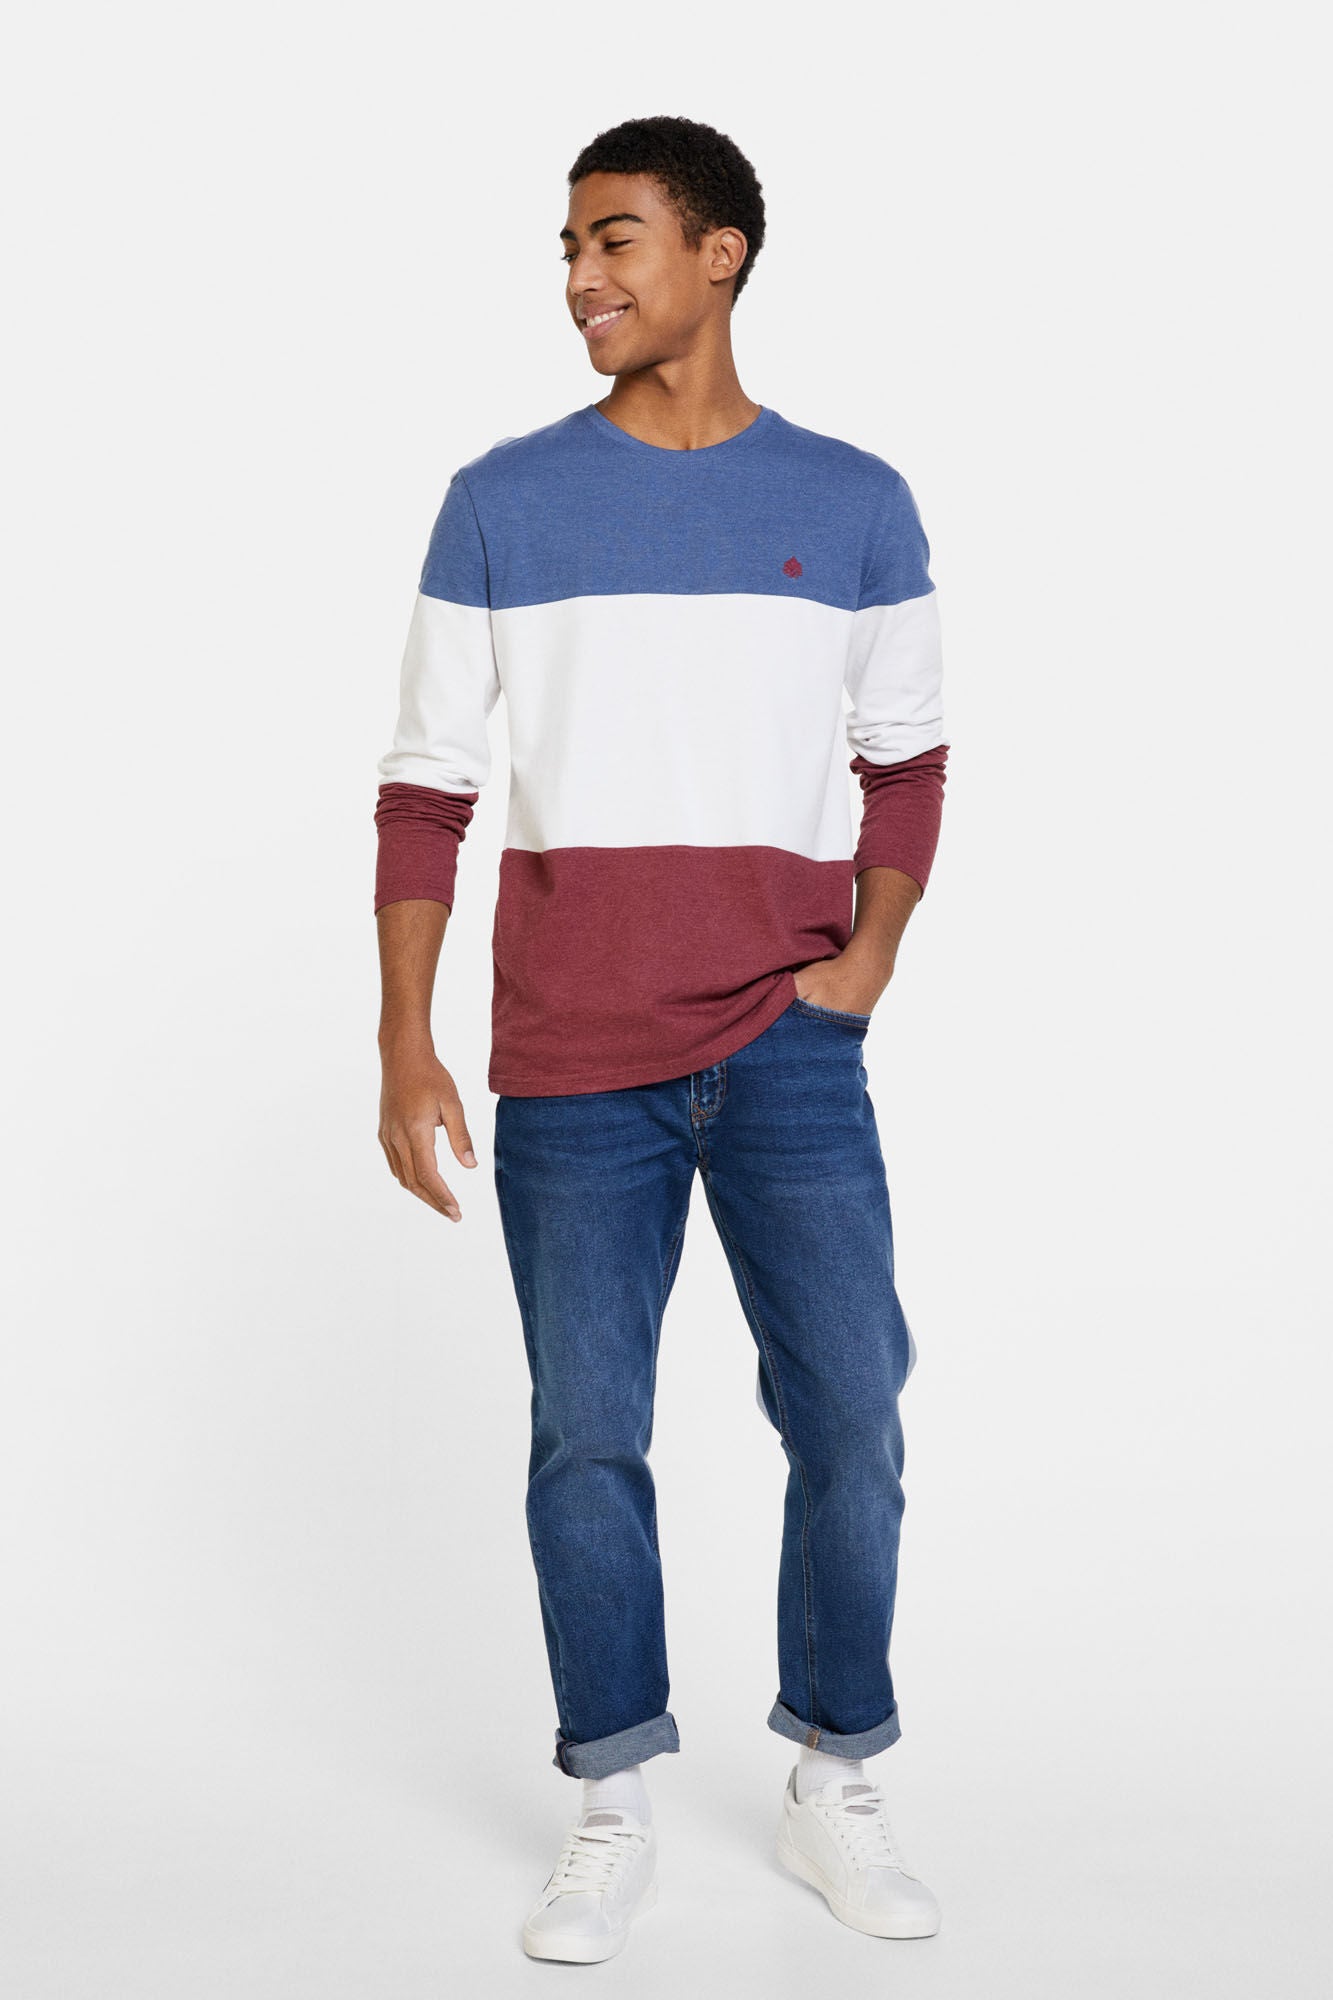 Long-sleeved tricolour top